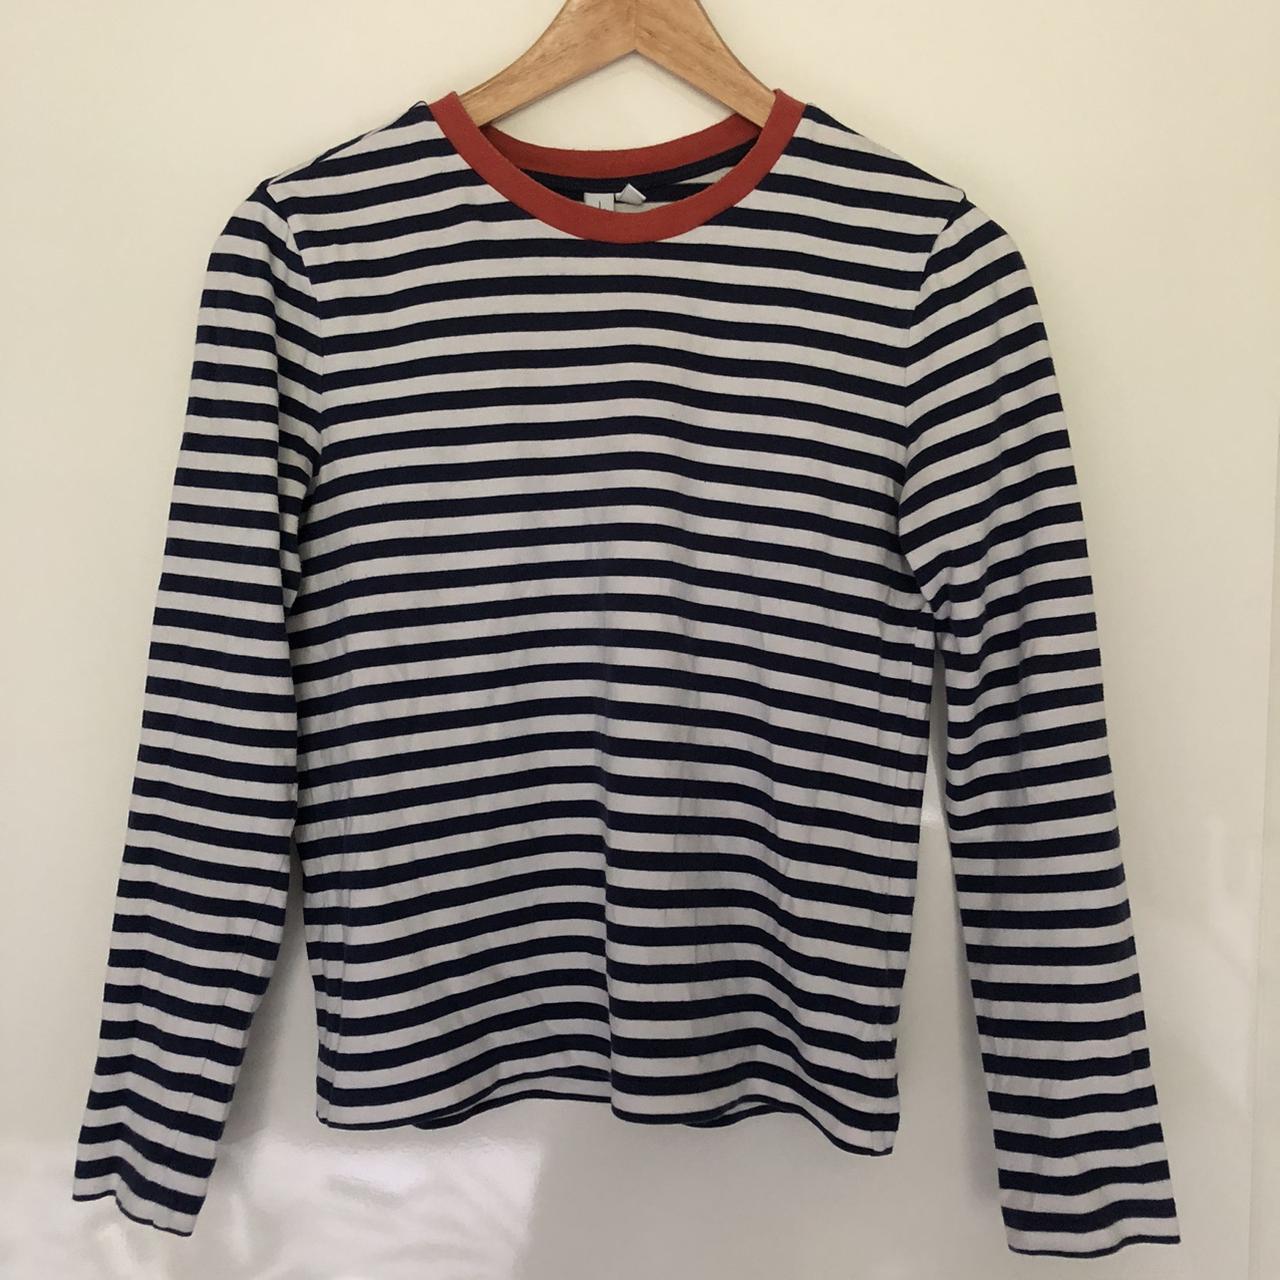 & other stories Navy and white long sleeved striped... - Depop